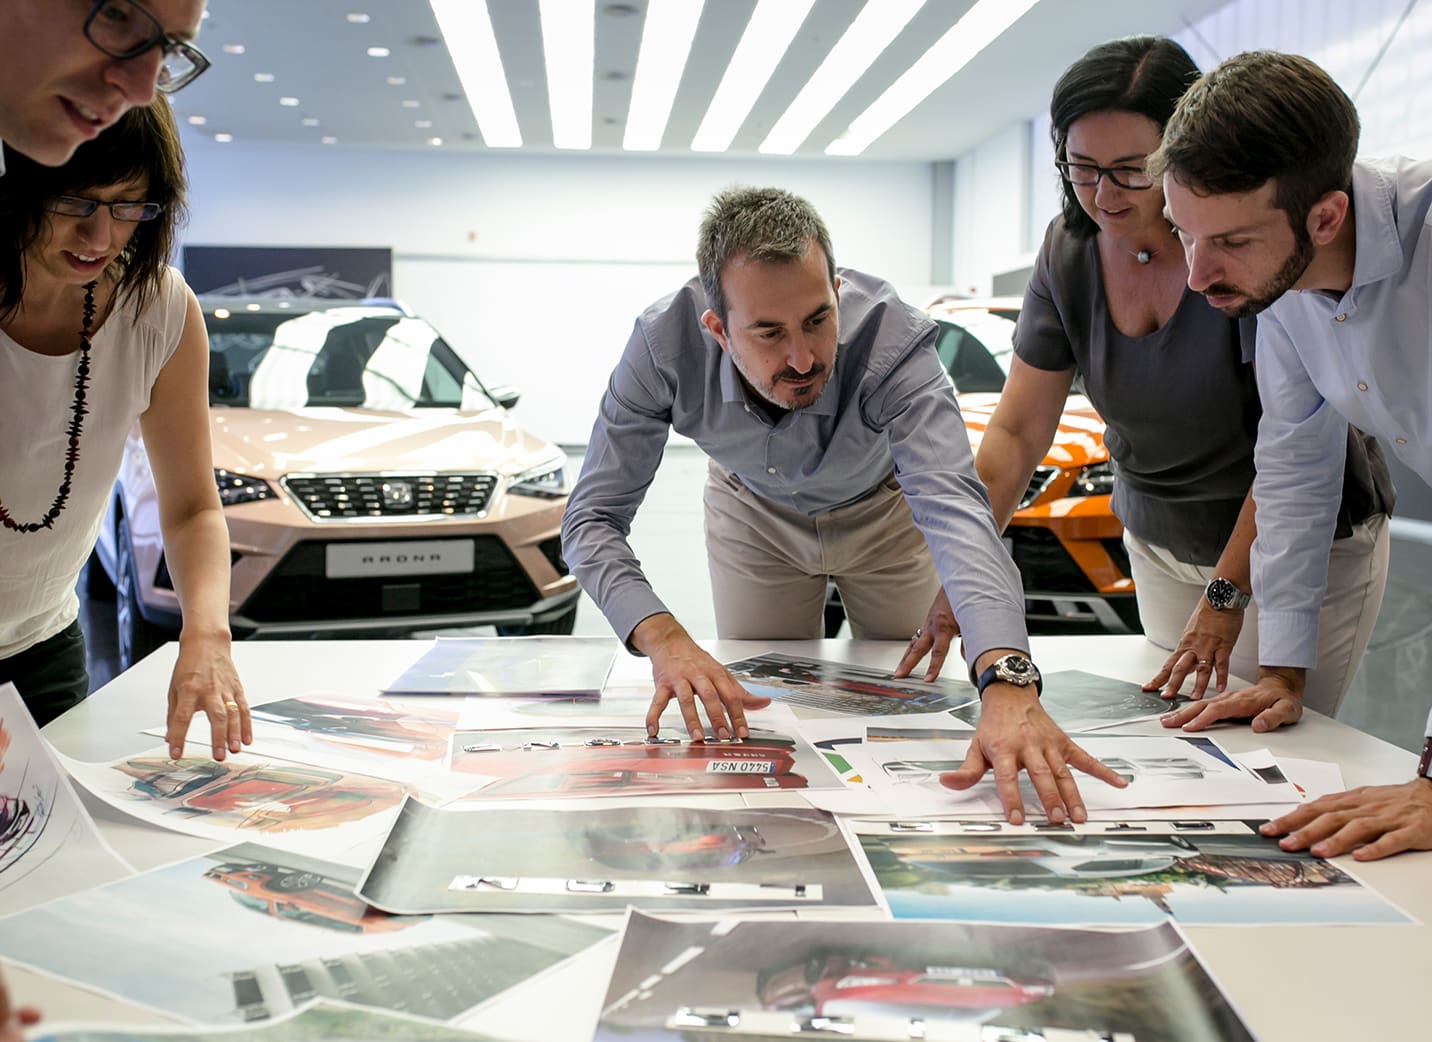 SEAT design team analysing images laid out on a table